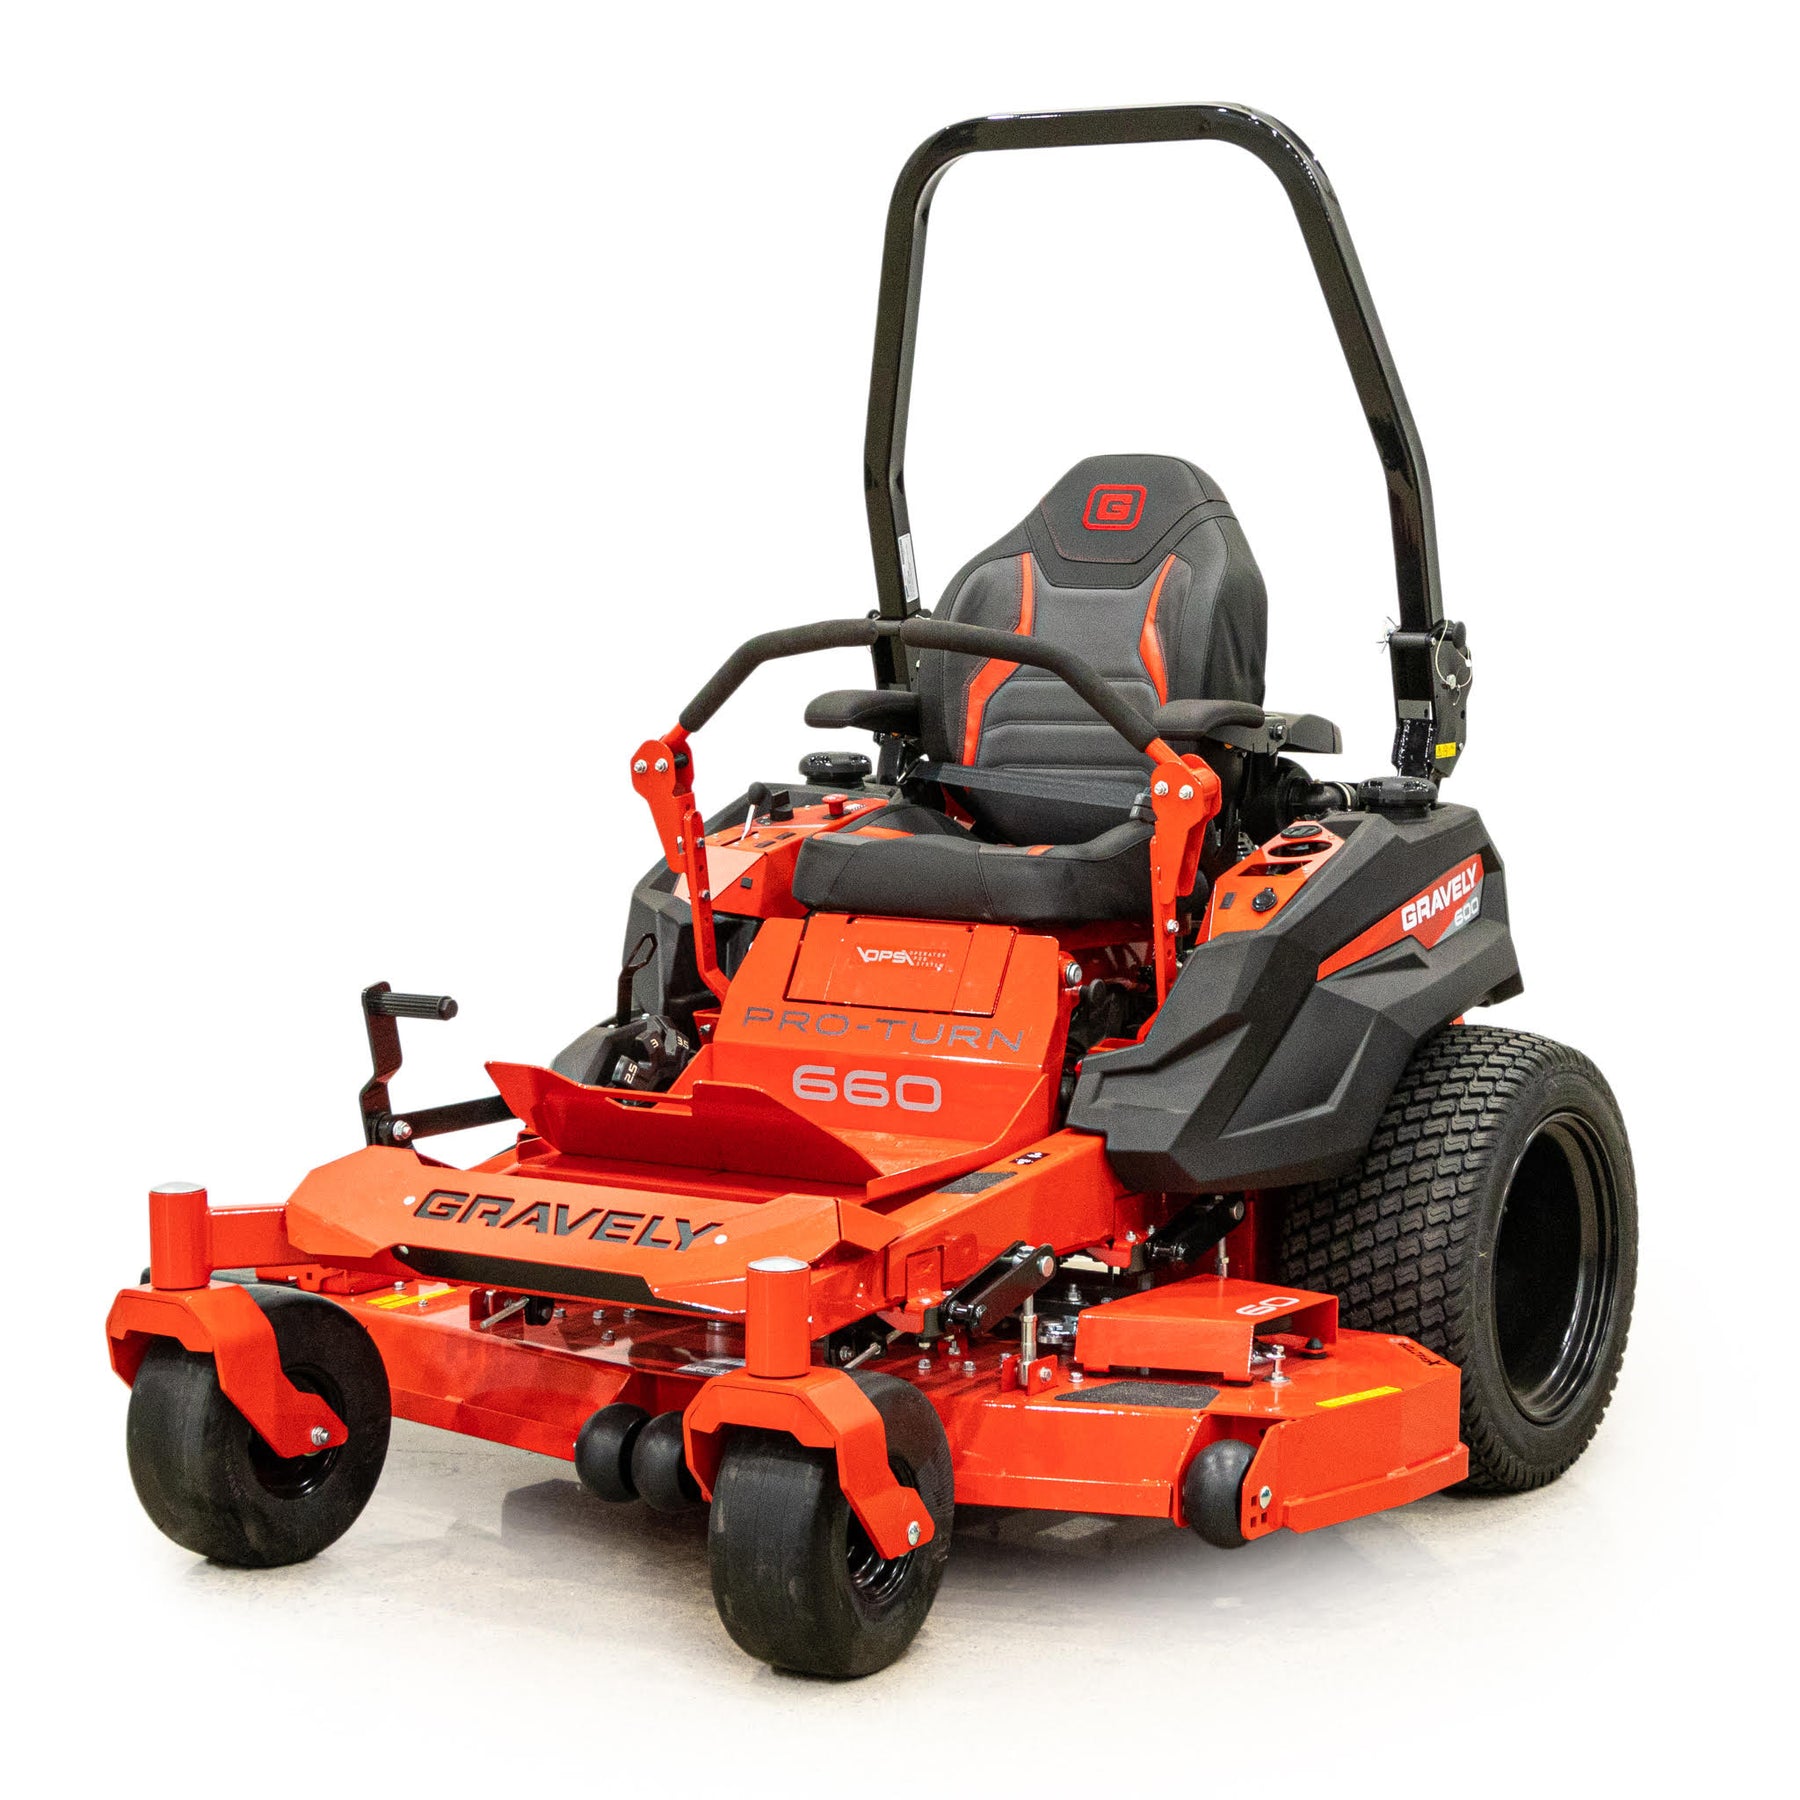 I have a large yard to mow. Is a zero turn mower a good choice?